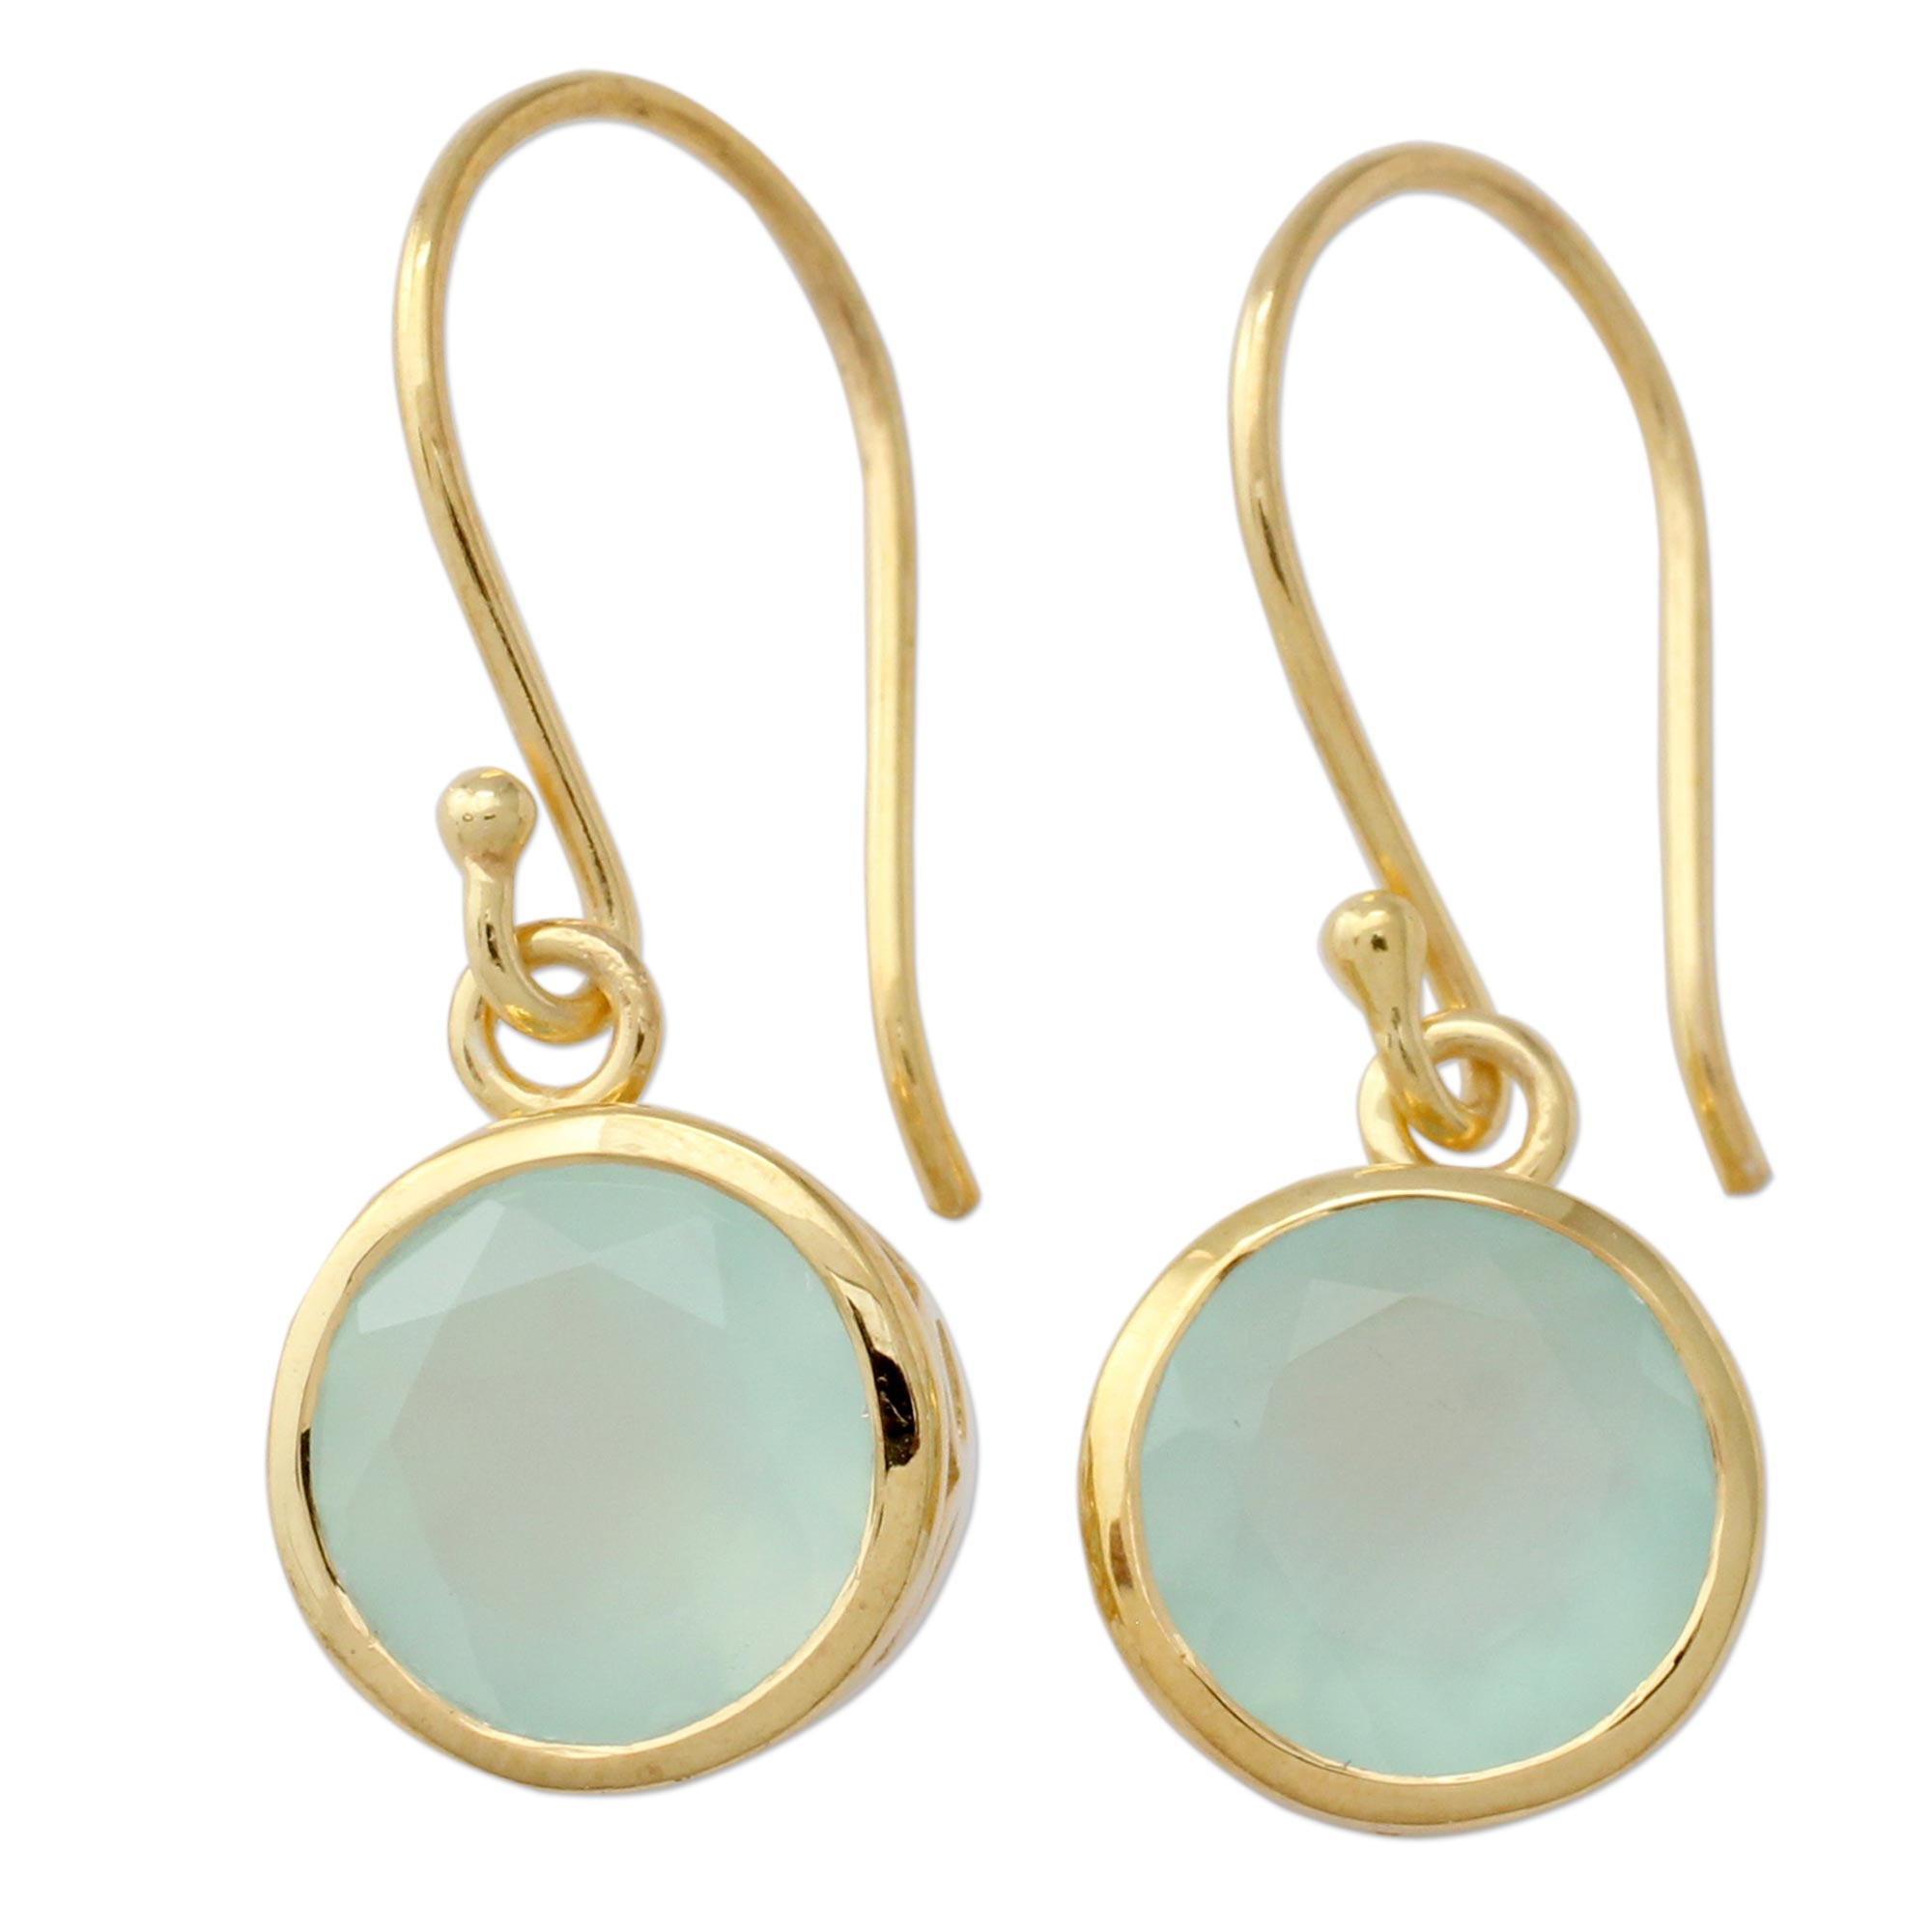 Gold Vermeil Earrings from India with Chalcedony - Elite Discretion ...